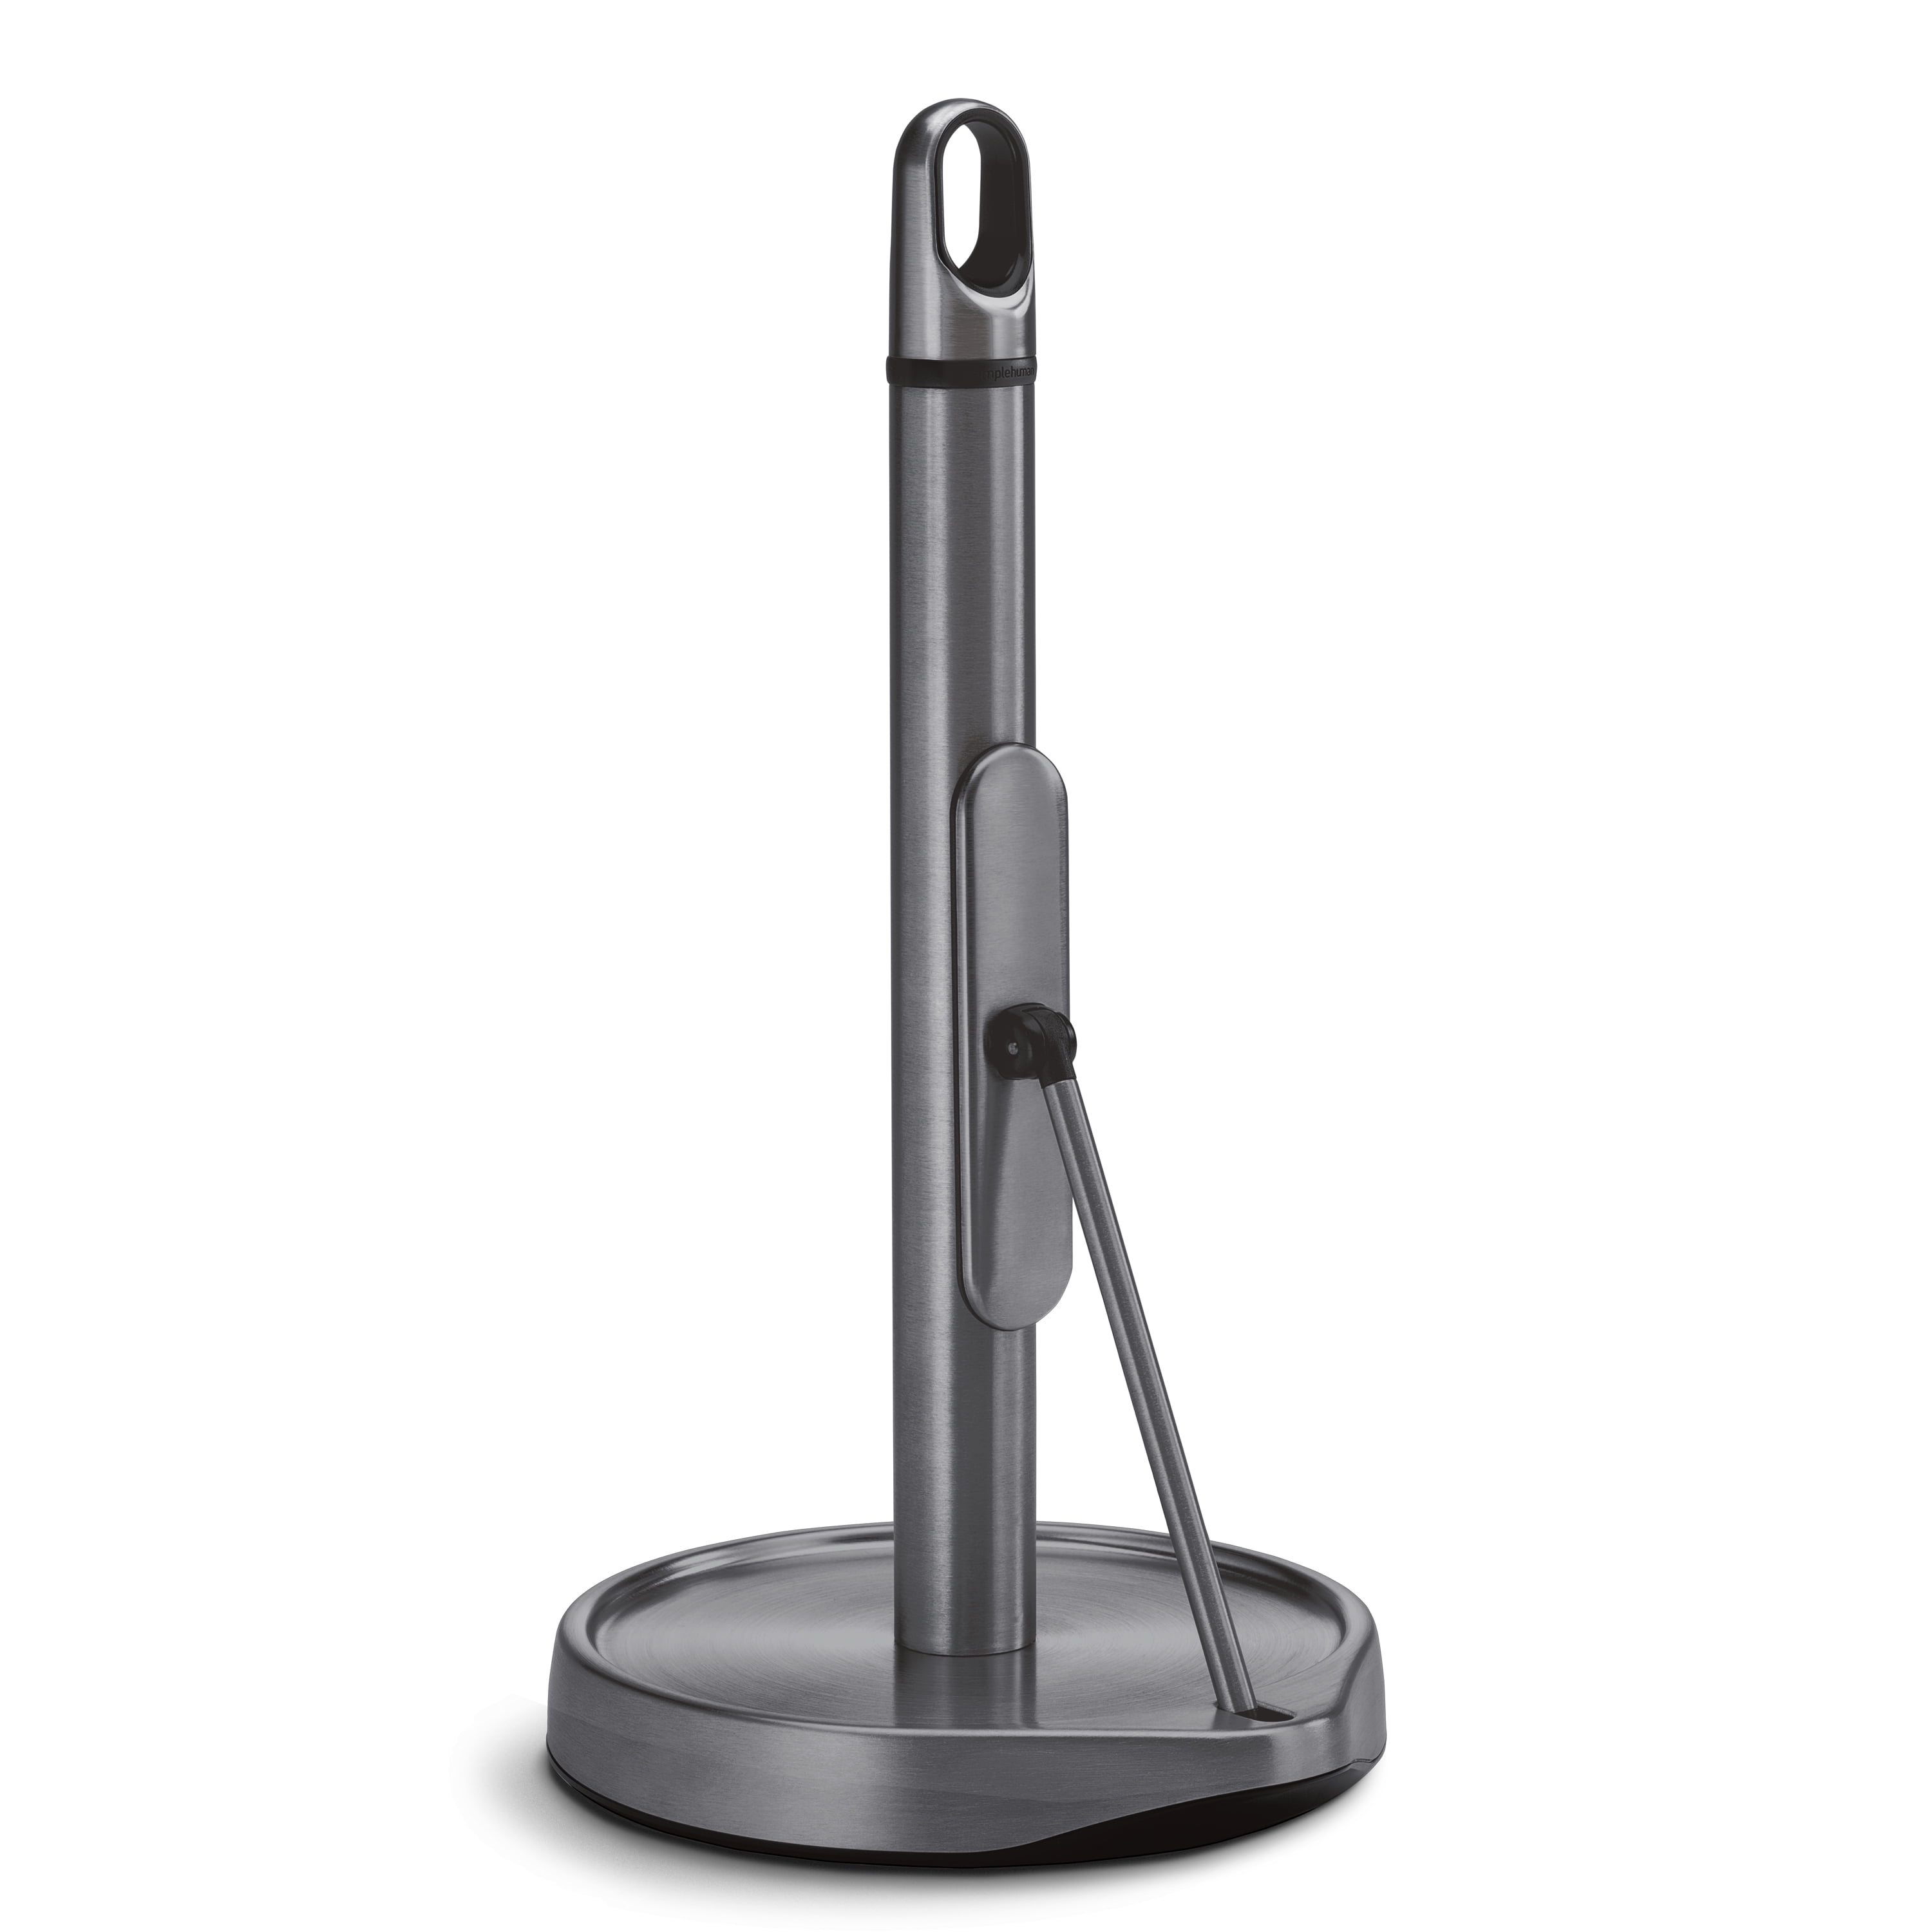 Simplehuman Tension Arm Standing Paper Towel Holder, Stainless Steel &  Reviews